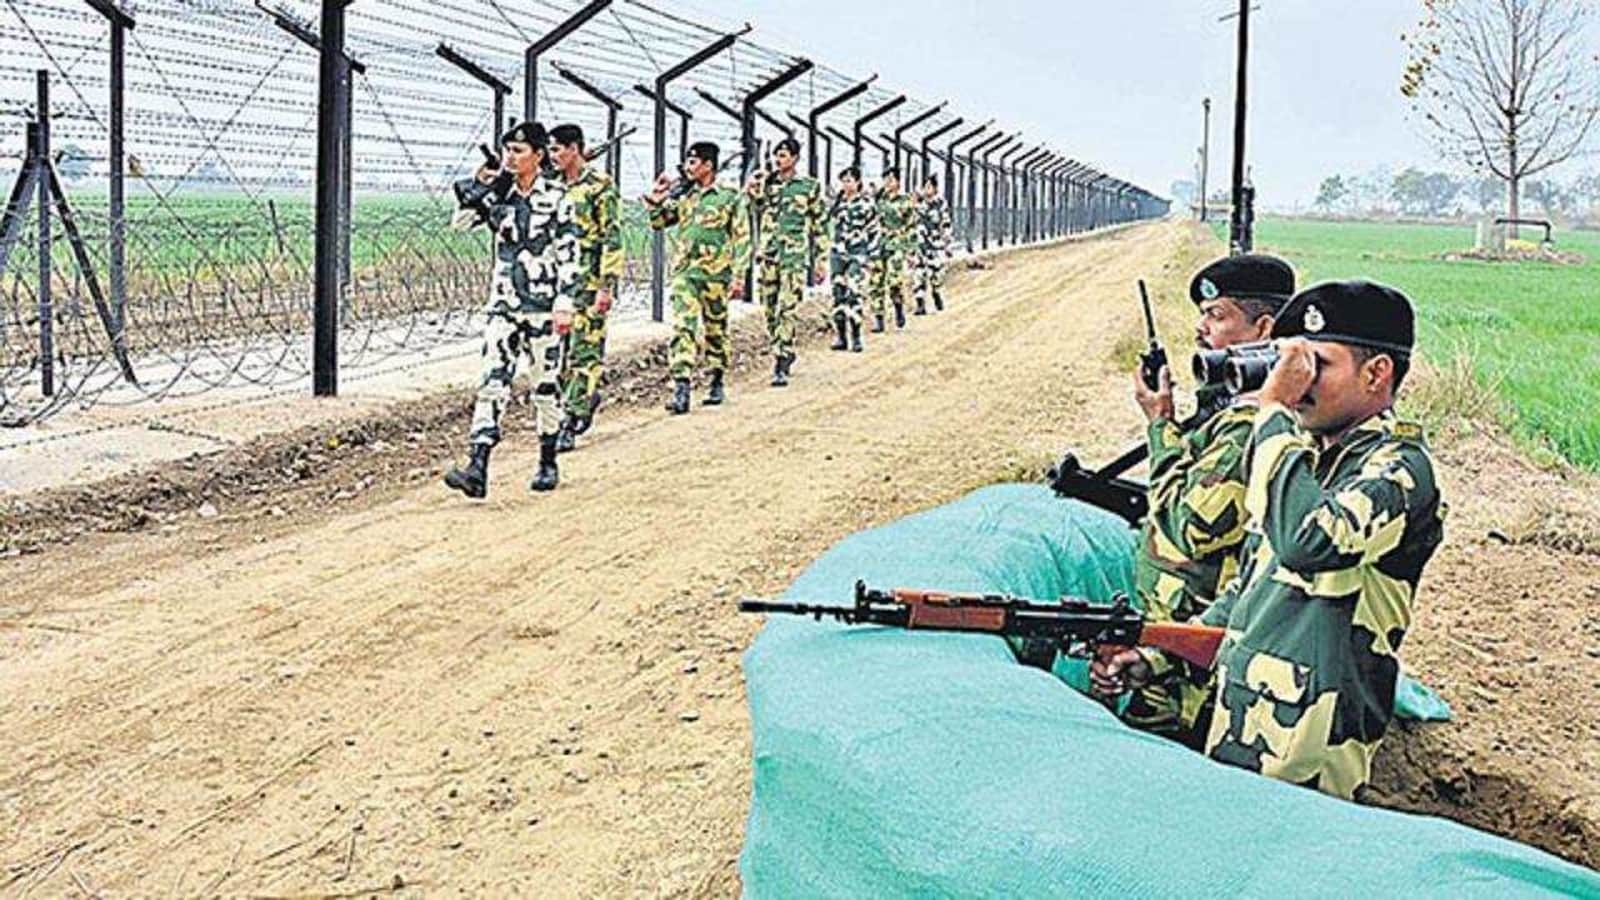 Security forces thwart drug smuggling attempt at international border; 1 shot down | Latest News India - Hindustan Times